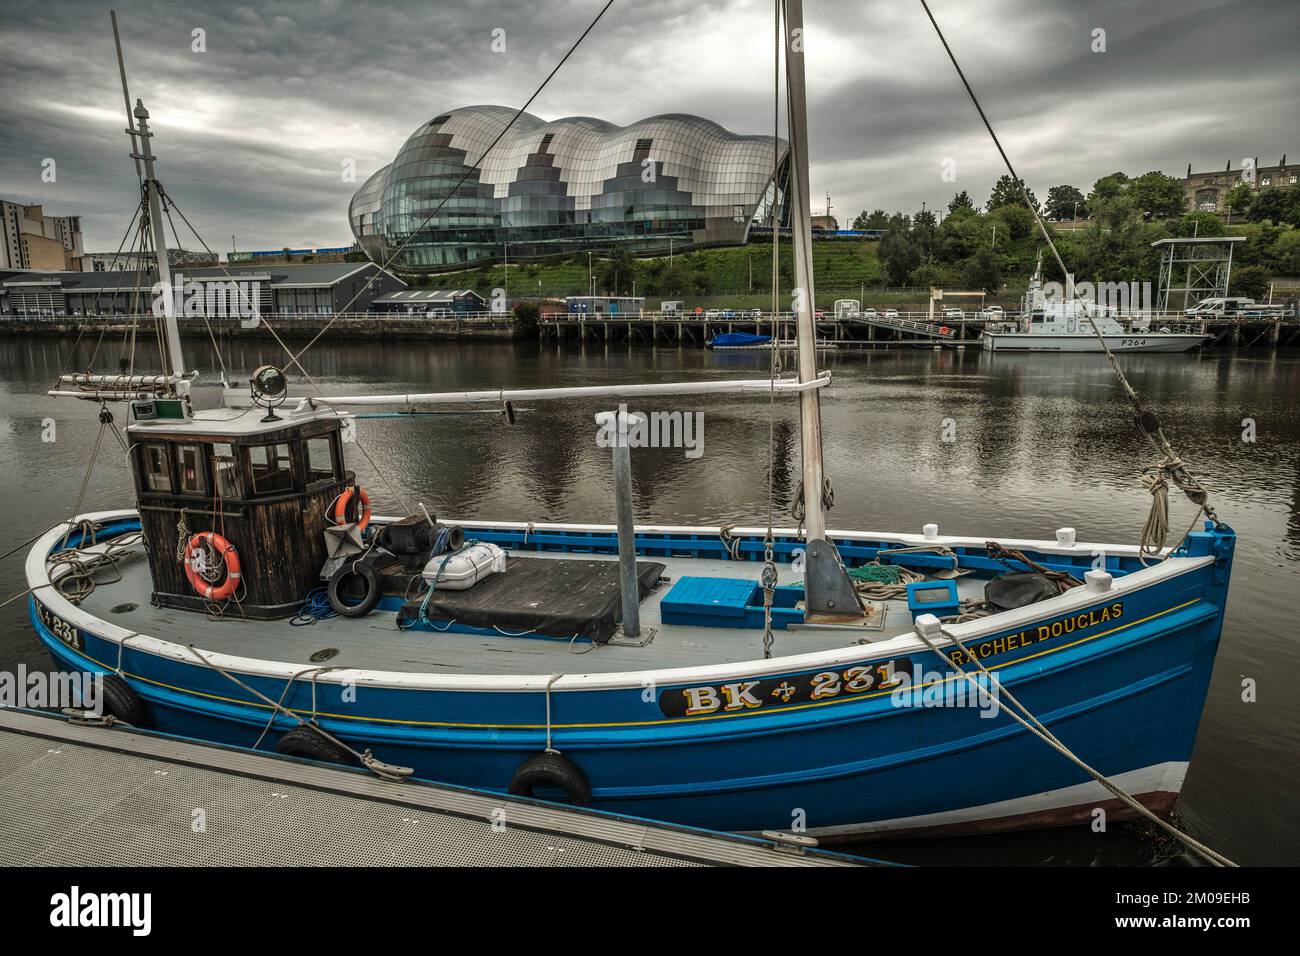 Trawler on Tyne in Newcastle with Sage Centre Behind Stock Photo